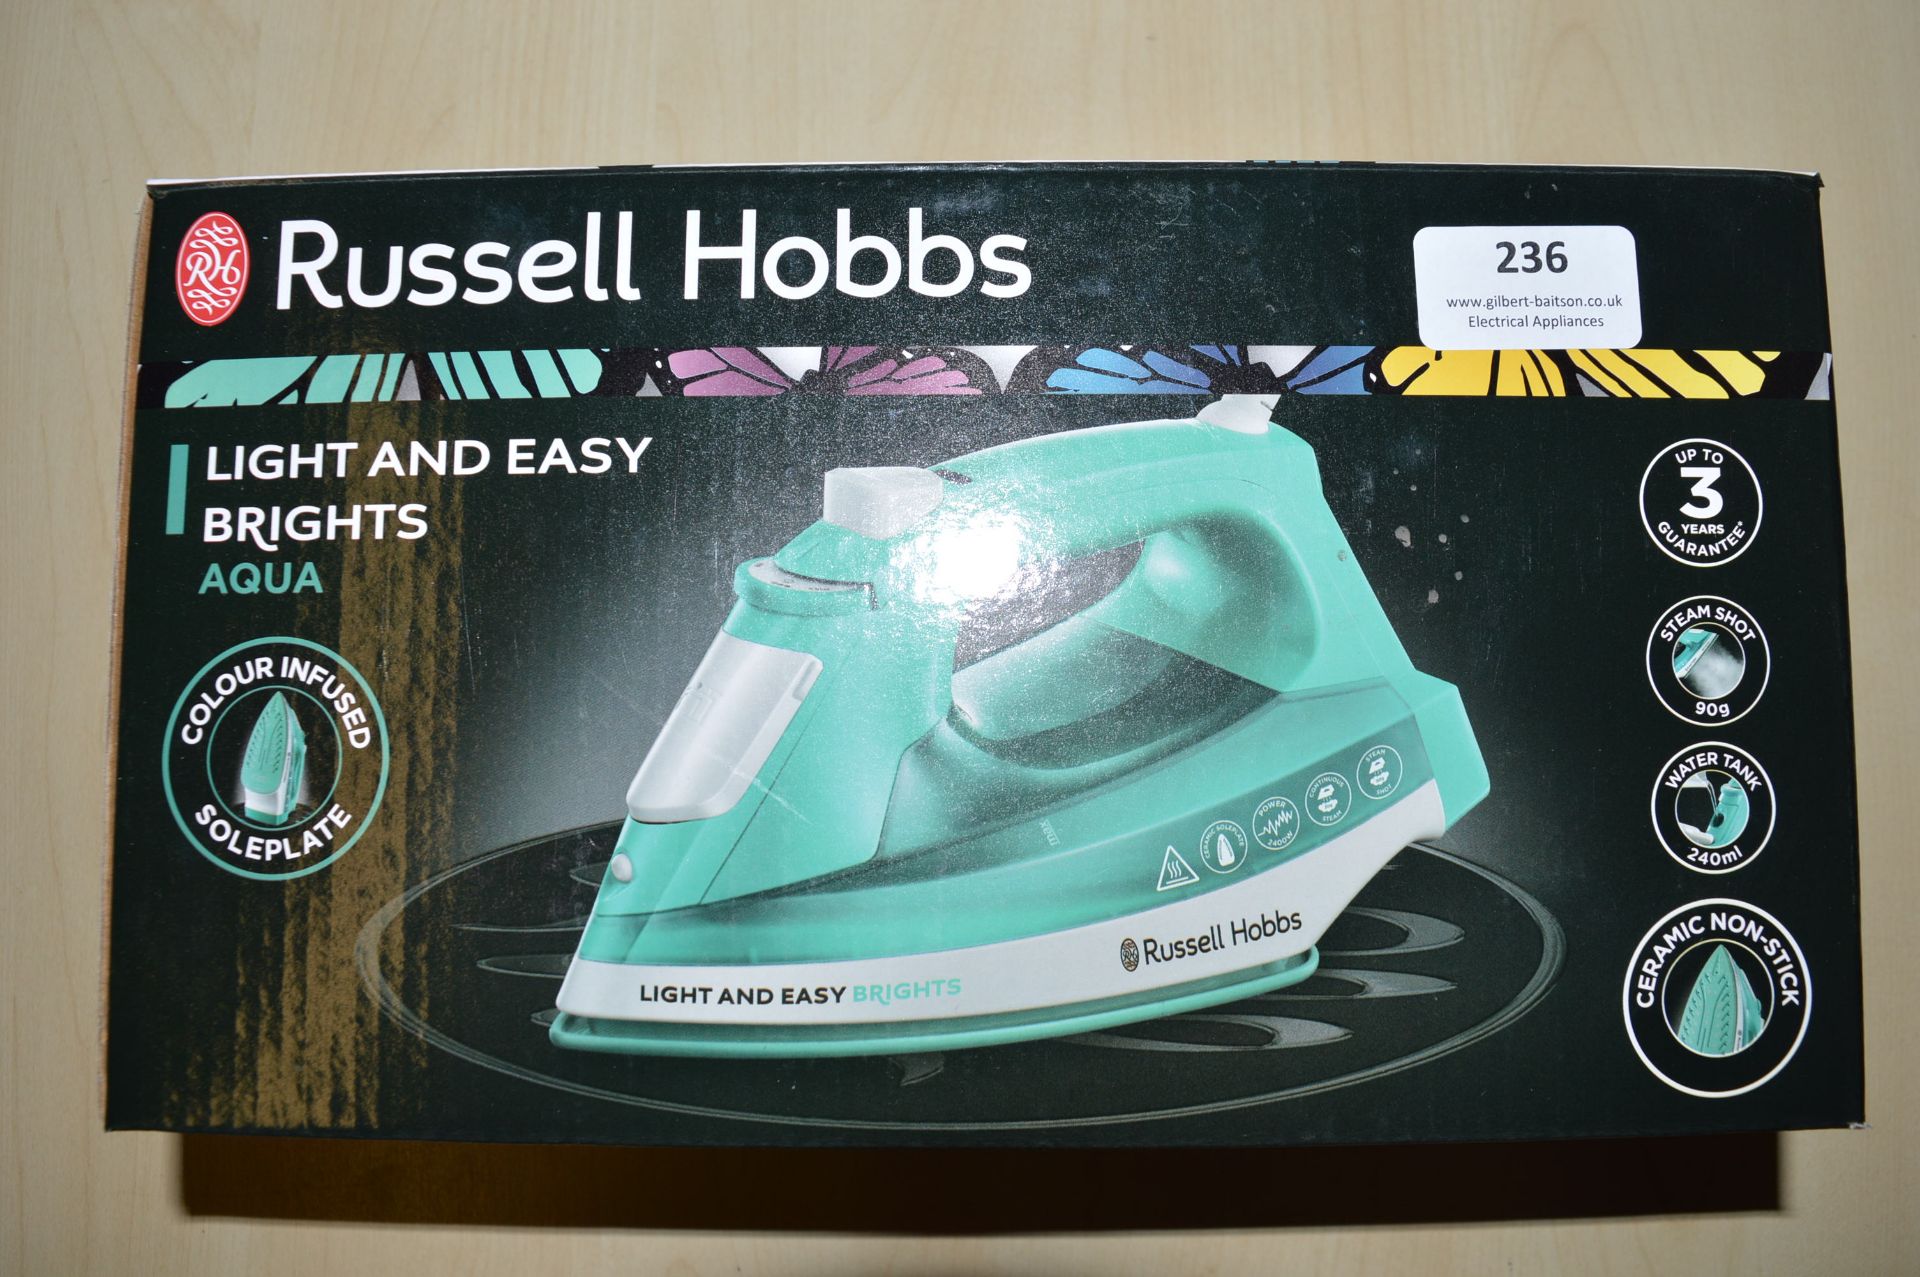 *Russell Hobbs Light and Easy Brights Aqua Iron